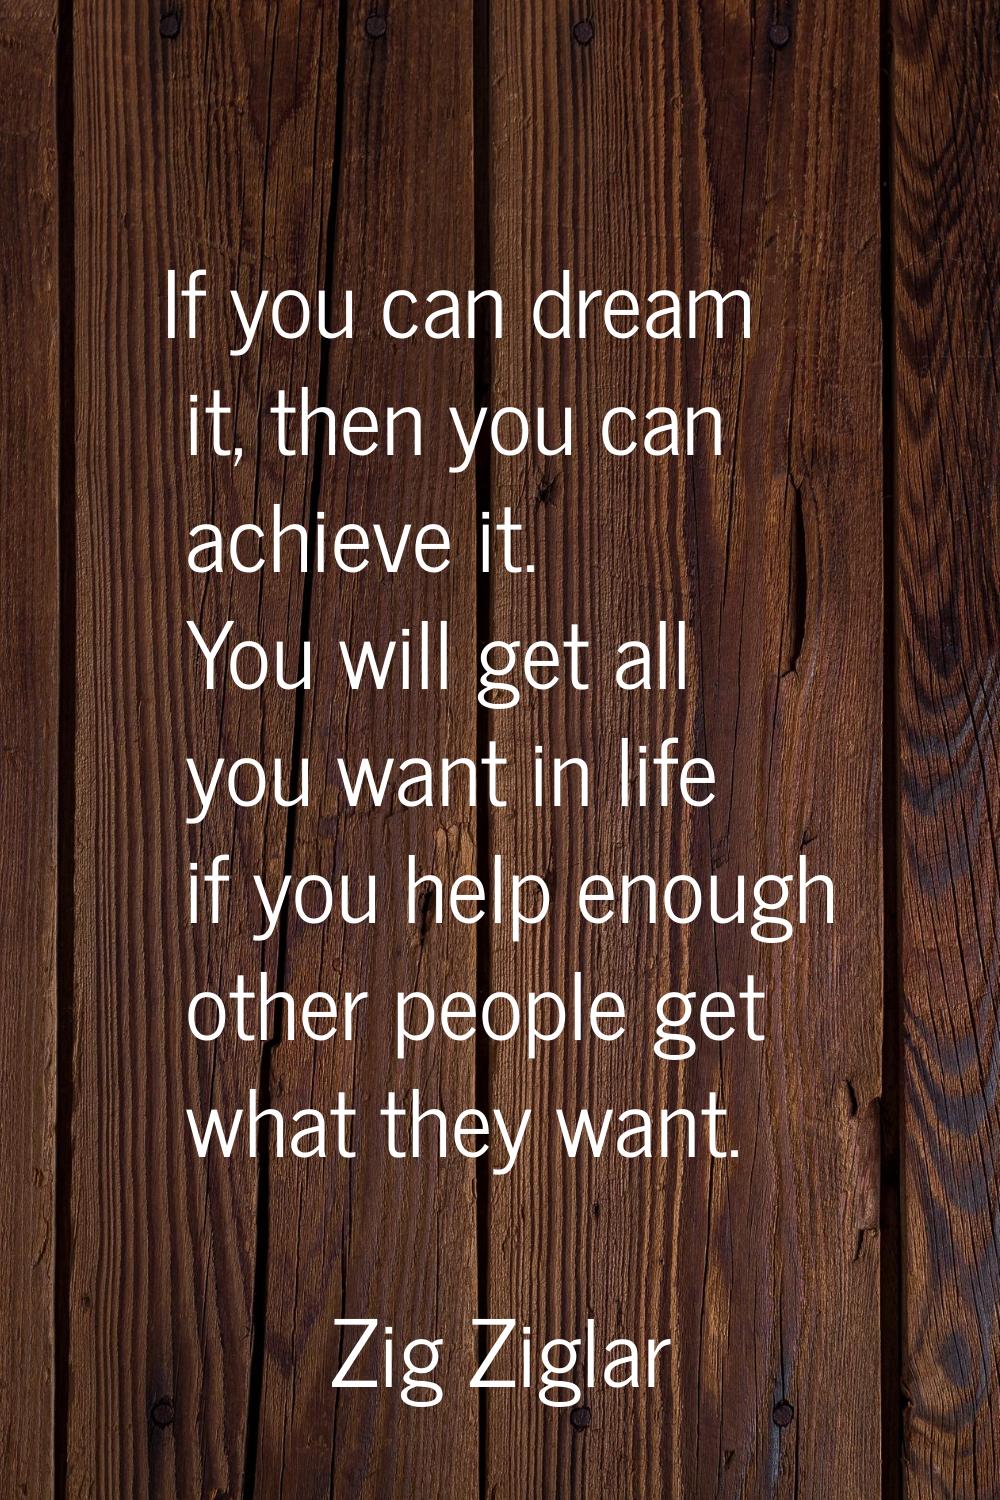 If you can dream it, then you can achieve it. You will get all you want in life if you help enough 